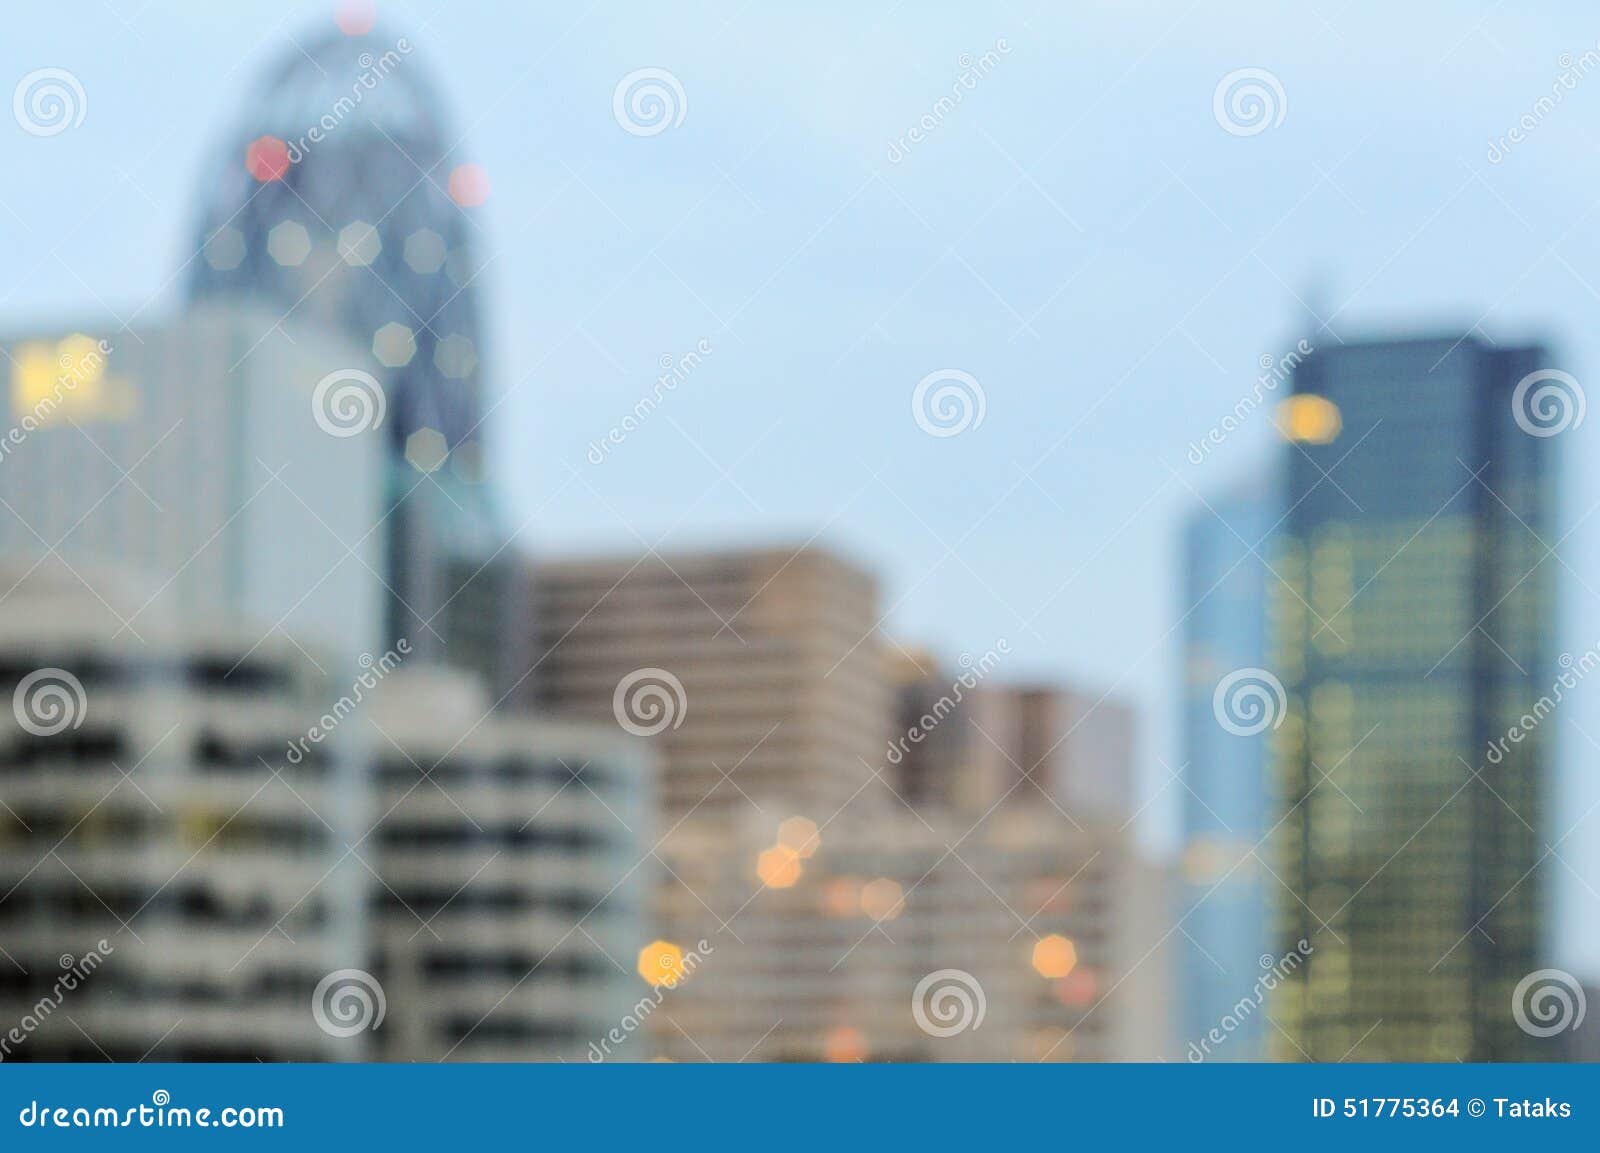 City Towers Blurred Background Stock Photo - Image of night, towers:  51775364